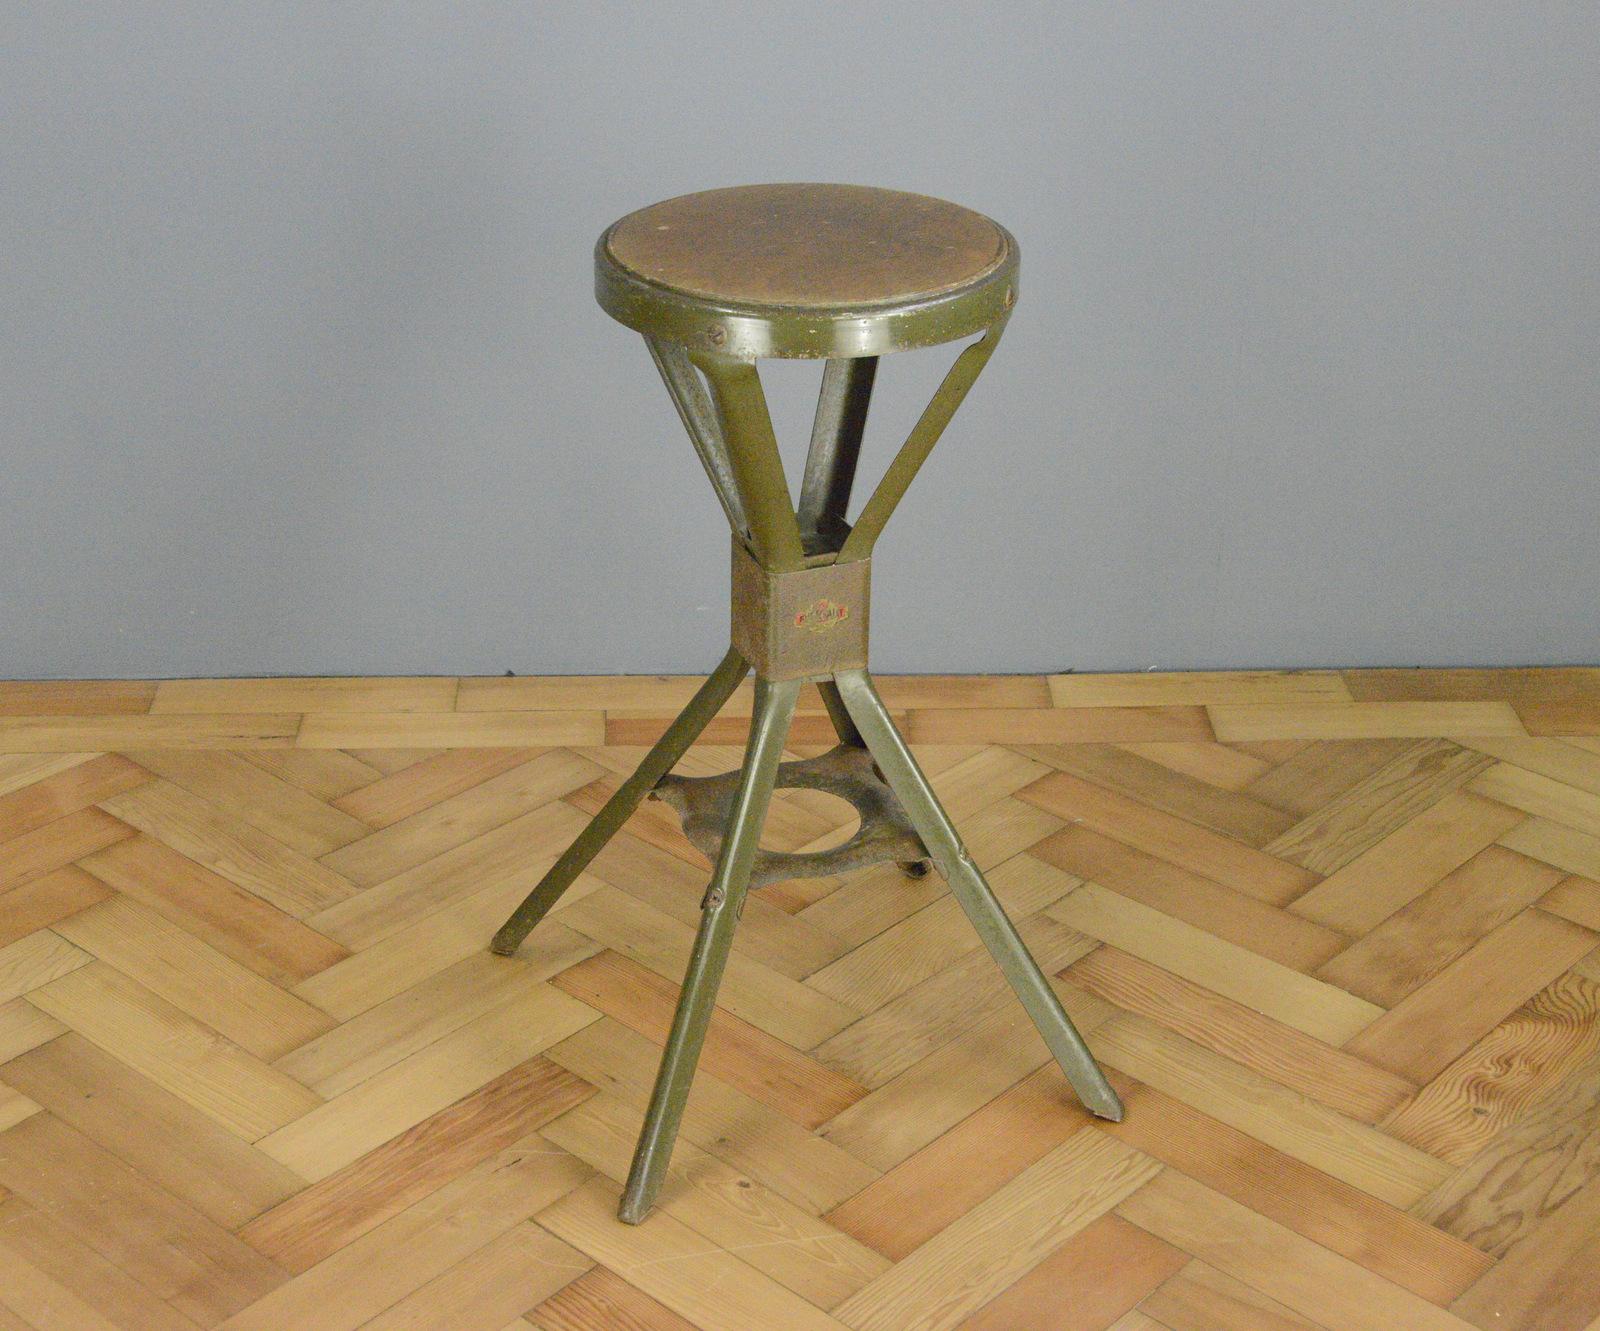 Steel Industrial Stool by Evertaut, circa 1940s